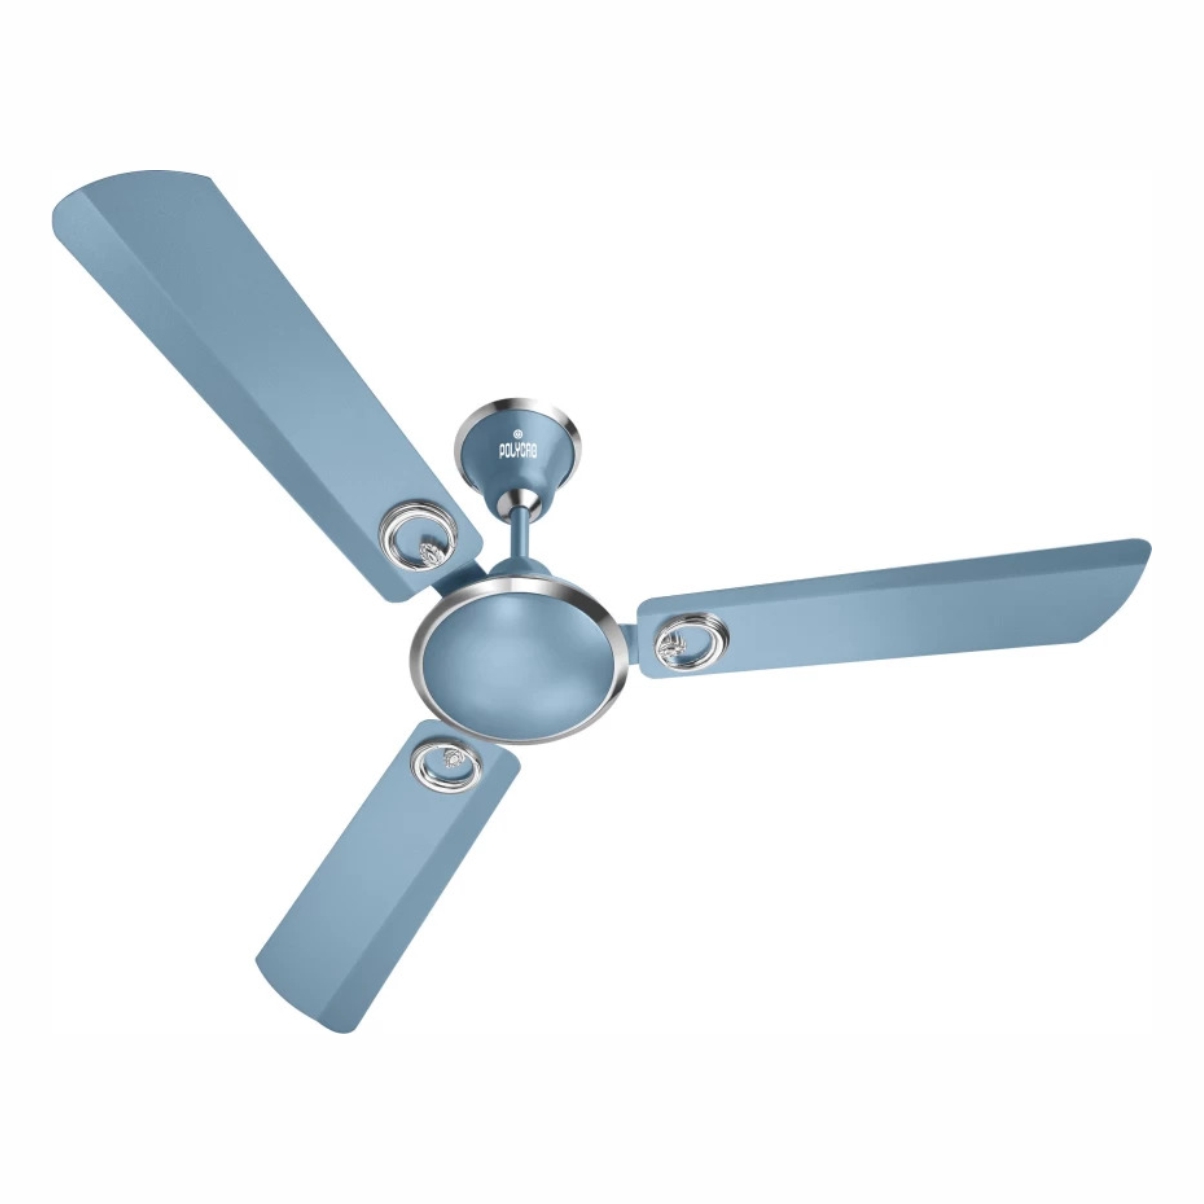 POLYCAB ELANZA HIGH SPEED 400 RPM 100 % COPPER MOTOR ANTI RUST BODY GLOSSY FINISH 1200 MM 3 BLADE CEILING FAN COLOR PEARL BLUE 